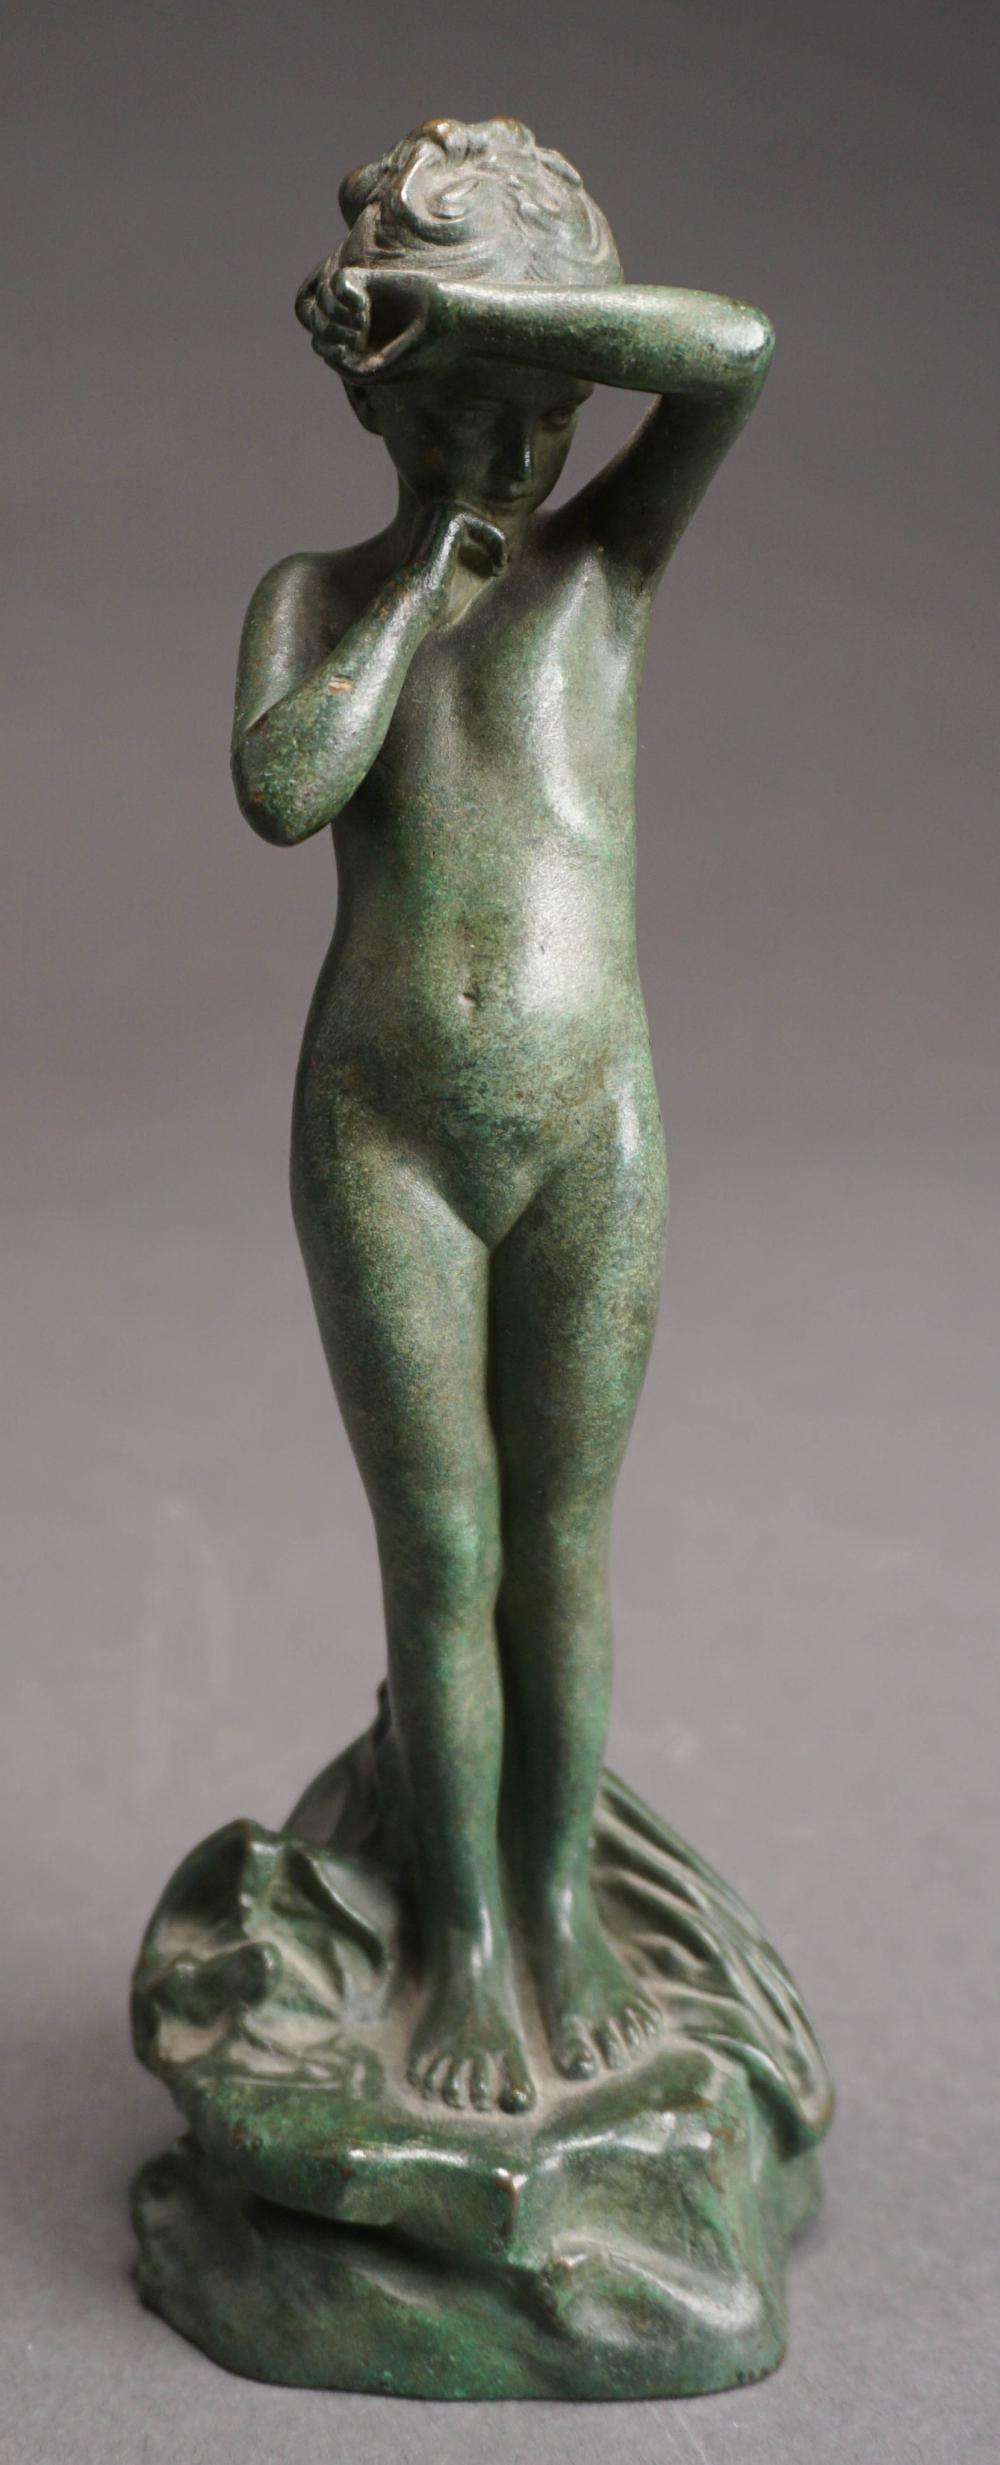 FRENCH BRONZE OF A YOUNG CHILD,